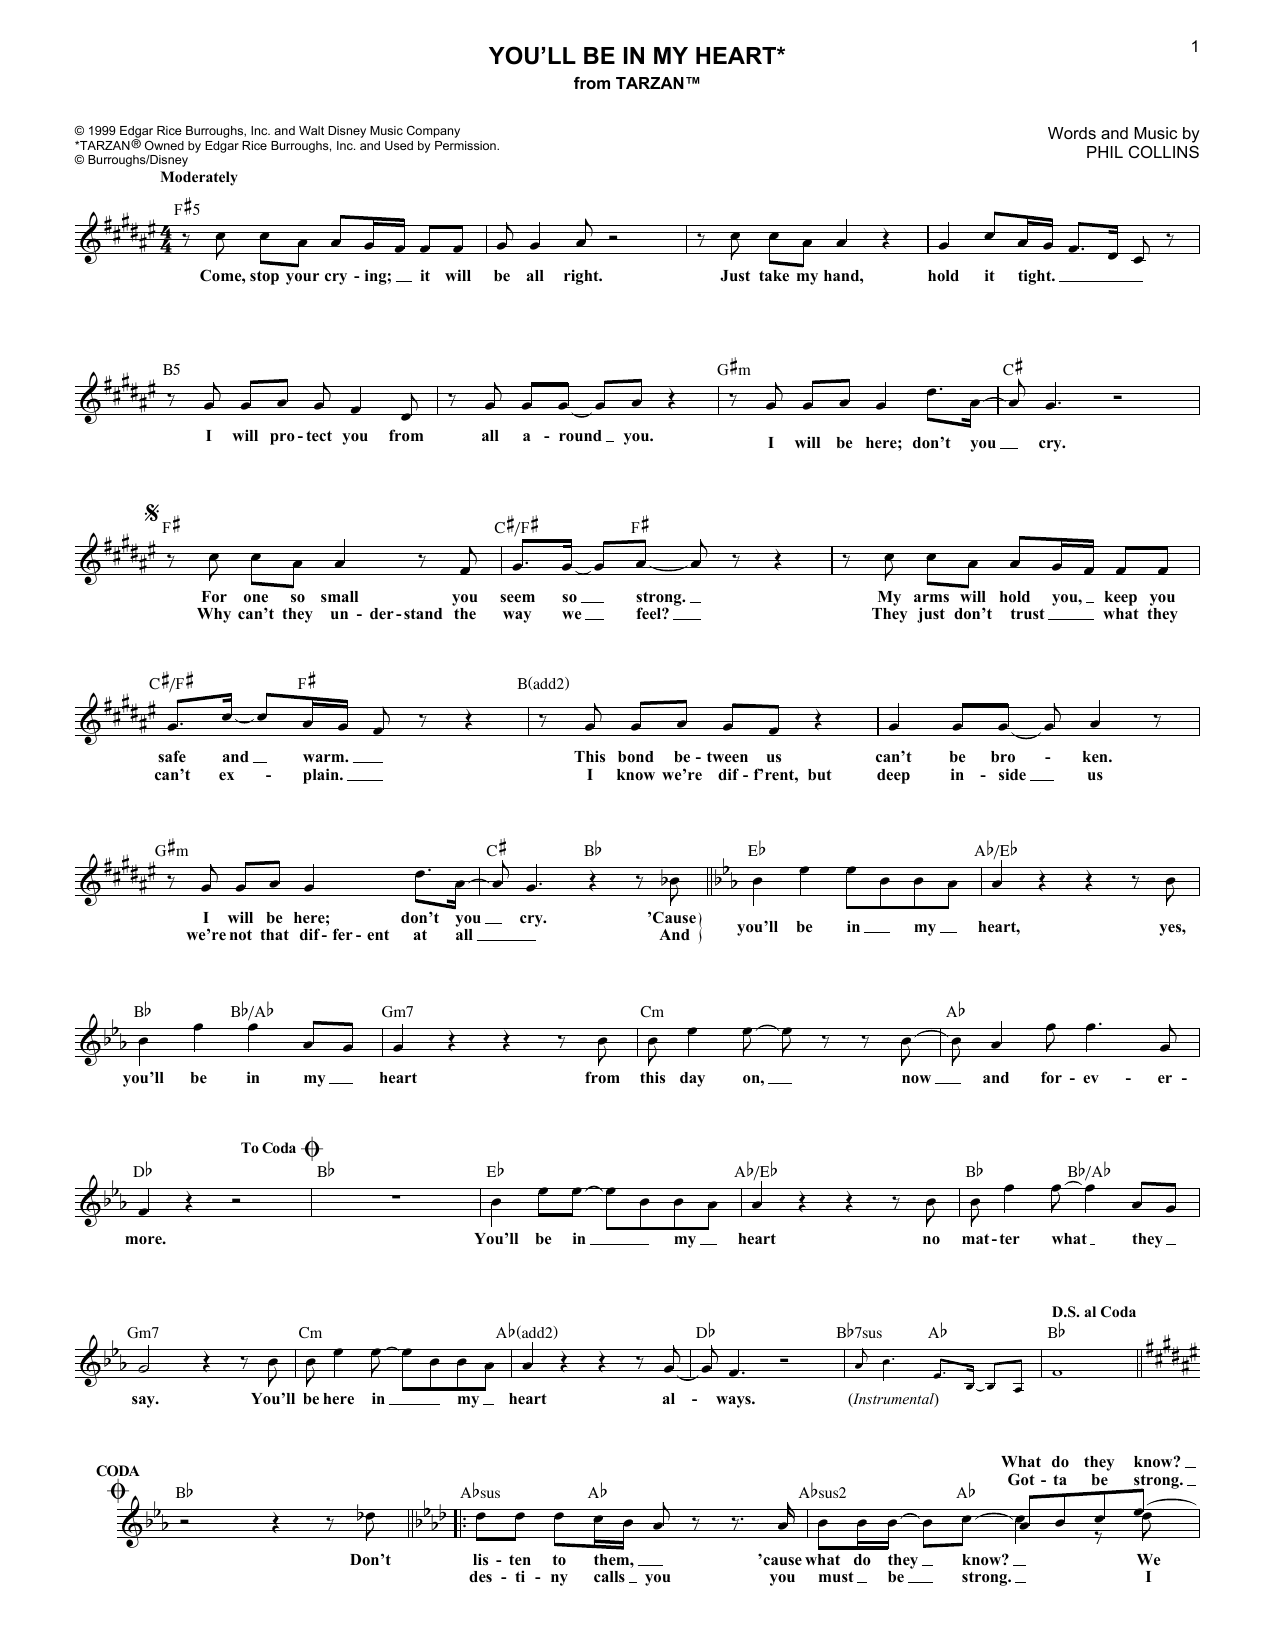 Download Phil Collins You'll Be In My Heart Sheet Music